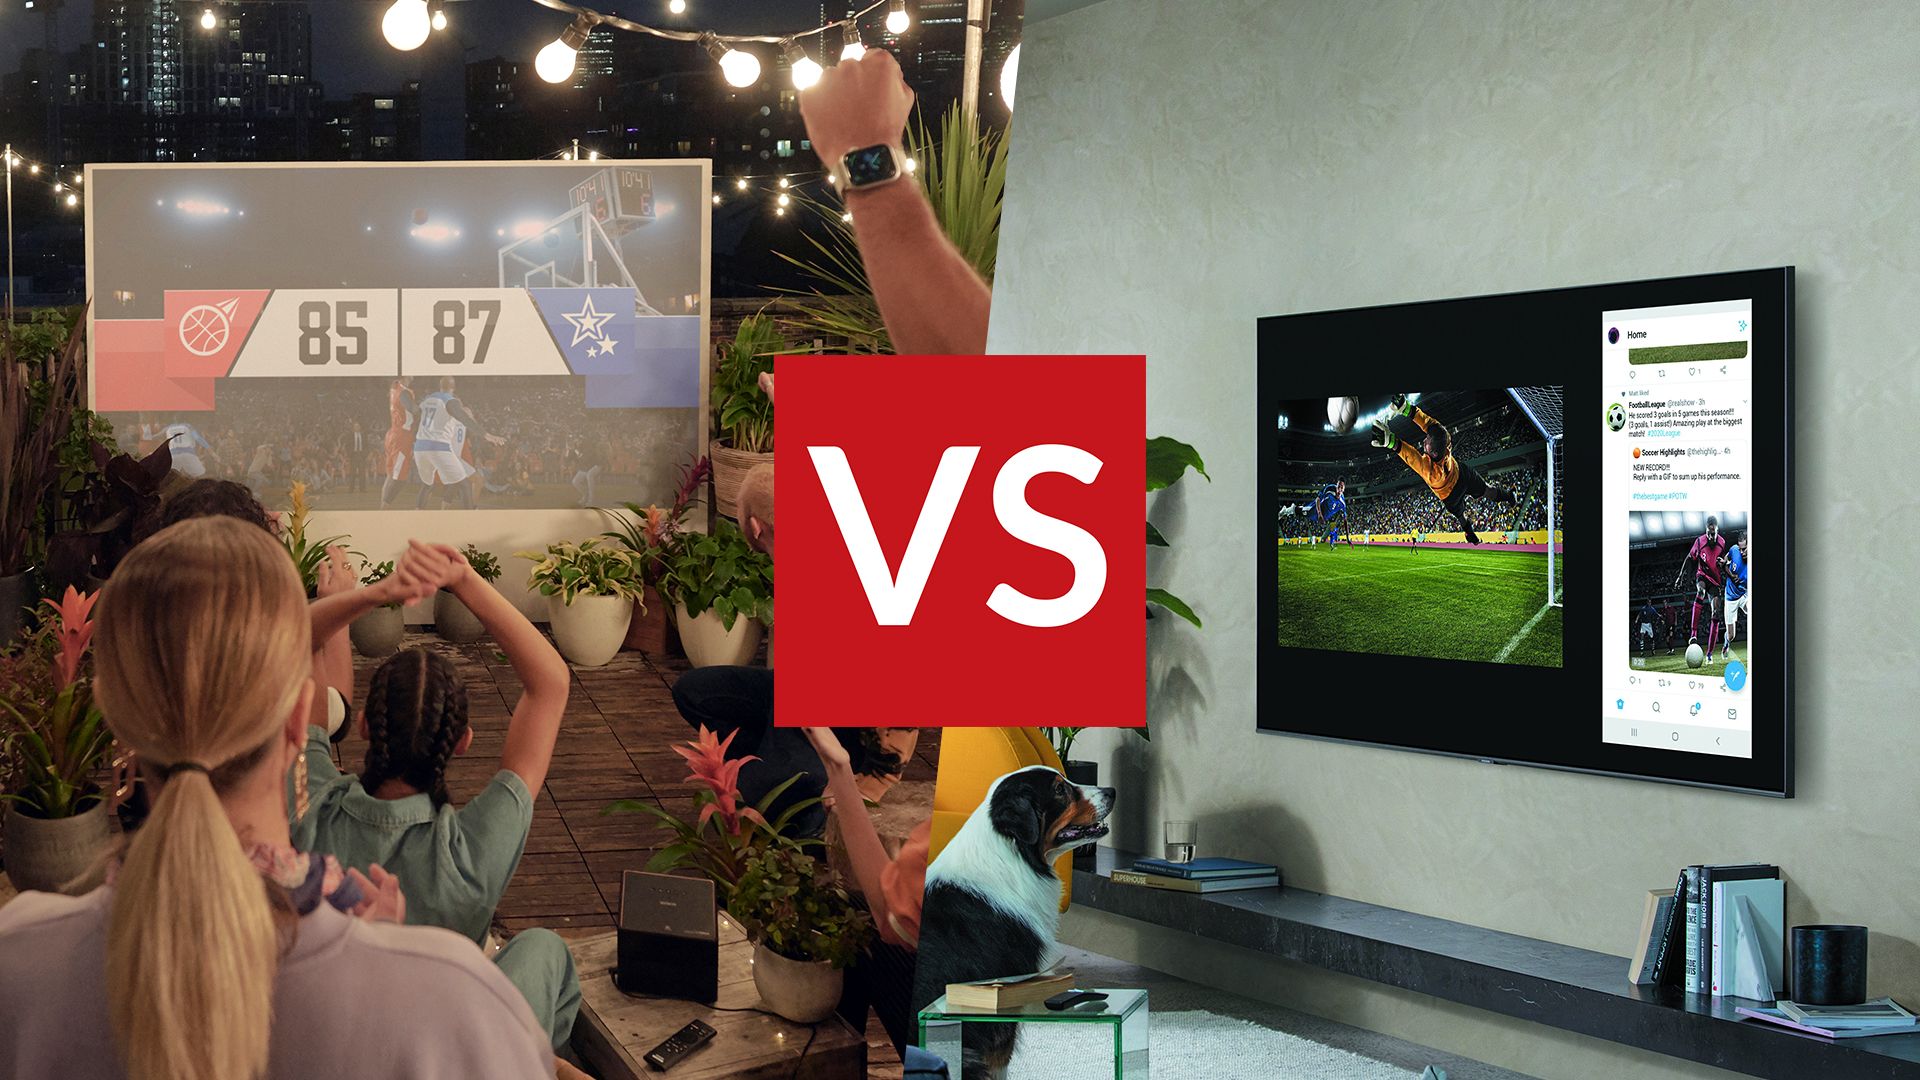 TV vs projector: which should you choose for a big-screen experience? | T3